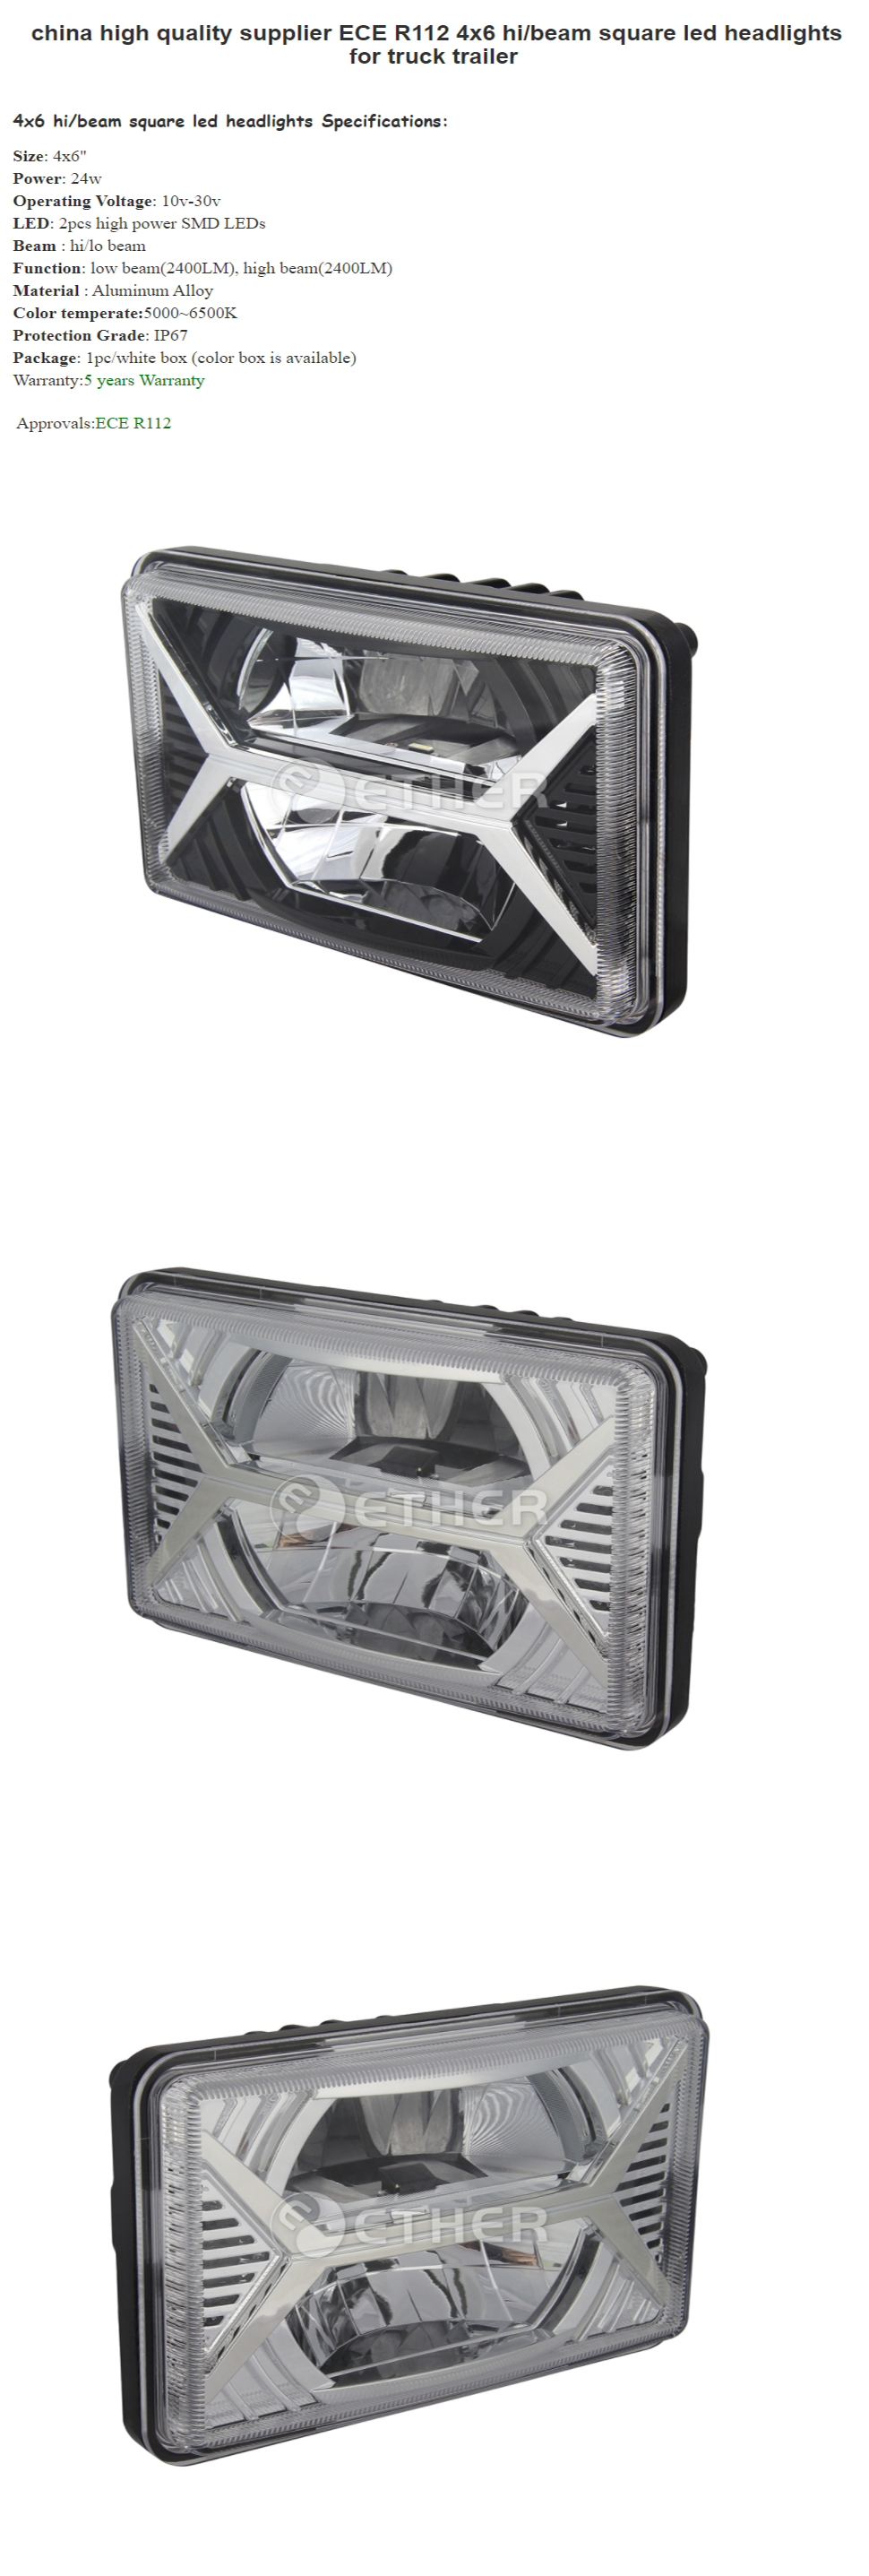 china-high-quality-supplier-ECE-R112-4x6-hi-beam-square-led-headlights-for-truck-trailer-ETHER-PHOTOELECTRIC-LIMITED-1_01